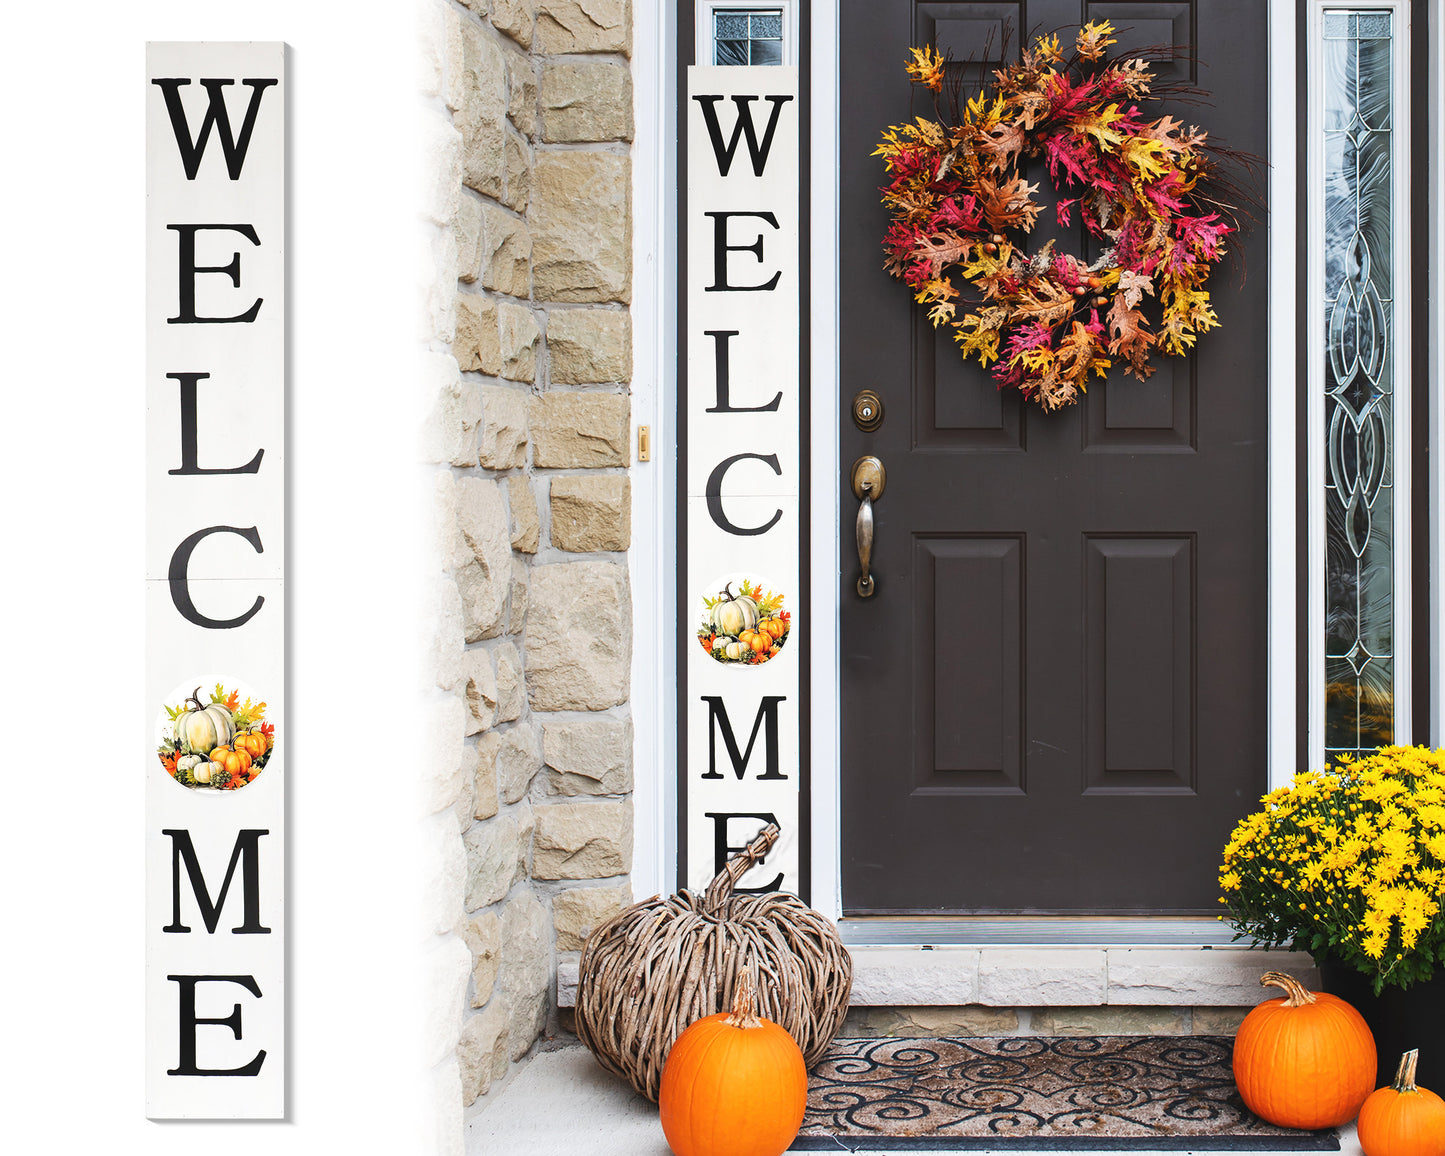 72in "Welcome" Fall Porch Sign with Pumpkins Design - Tall Porch Board Decor for Front Door during Autumn and Thanksgiving Celebrations